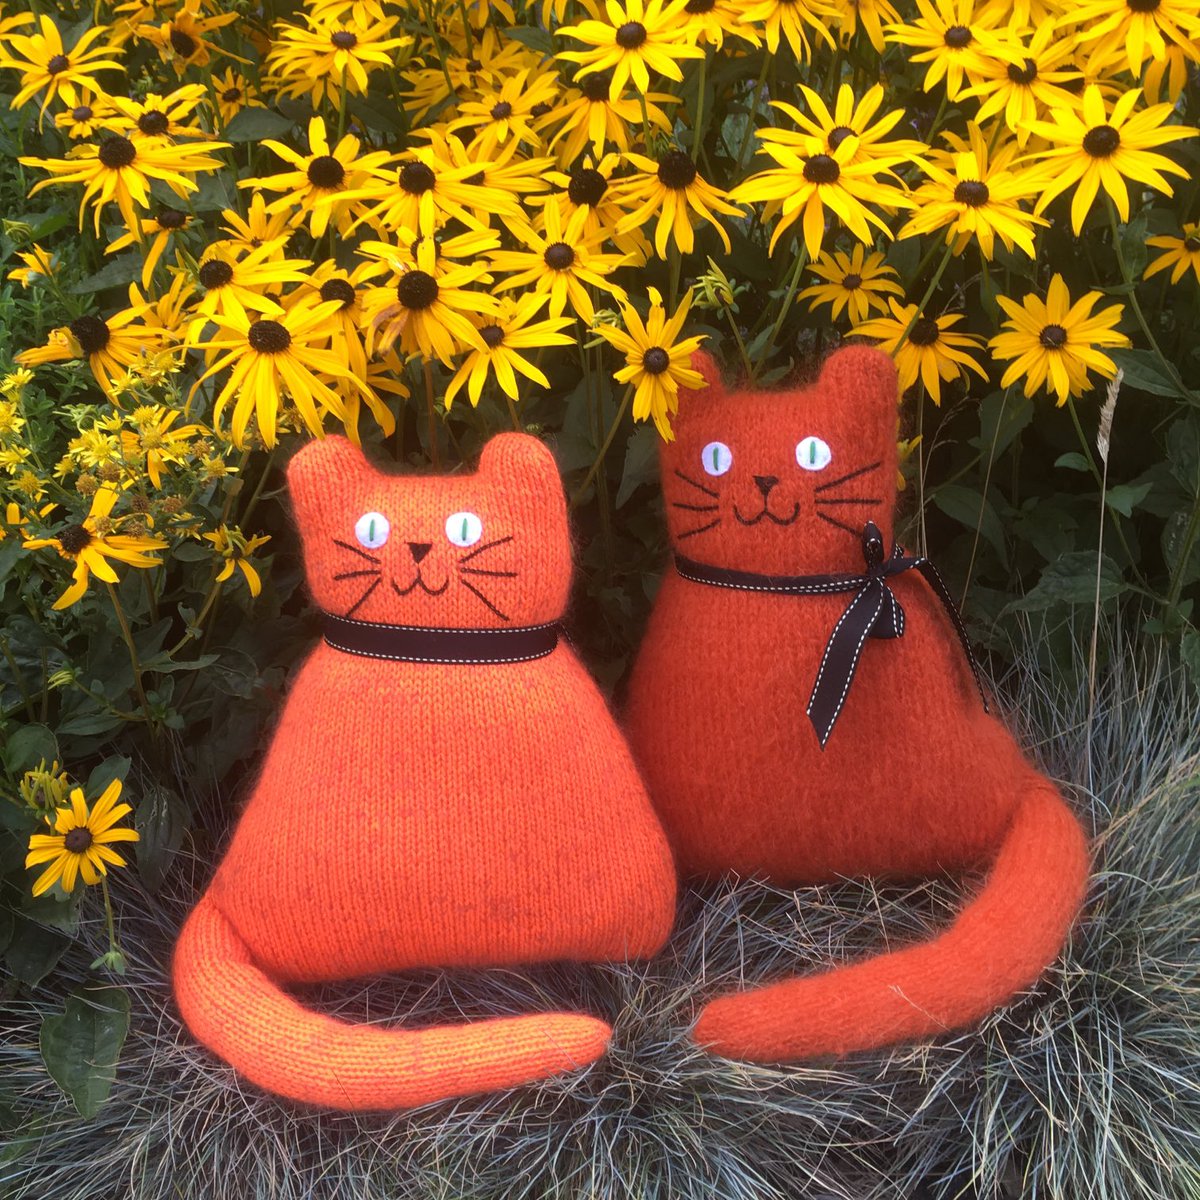 Happy #Caturday!
Check our #etsy for #specialpromotion this weekend! #shopindie #etsy #UKGuftHour  #UKGiftAM #HandmadeHour threewoollyowlsstore.etsy.com